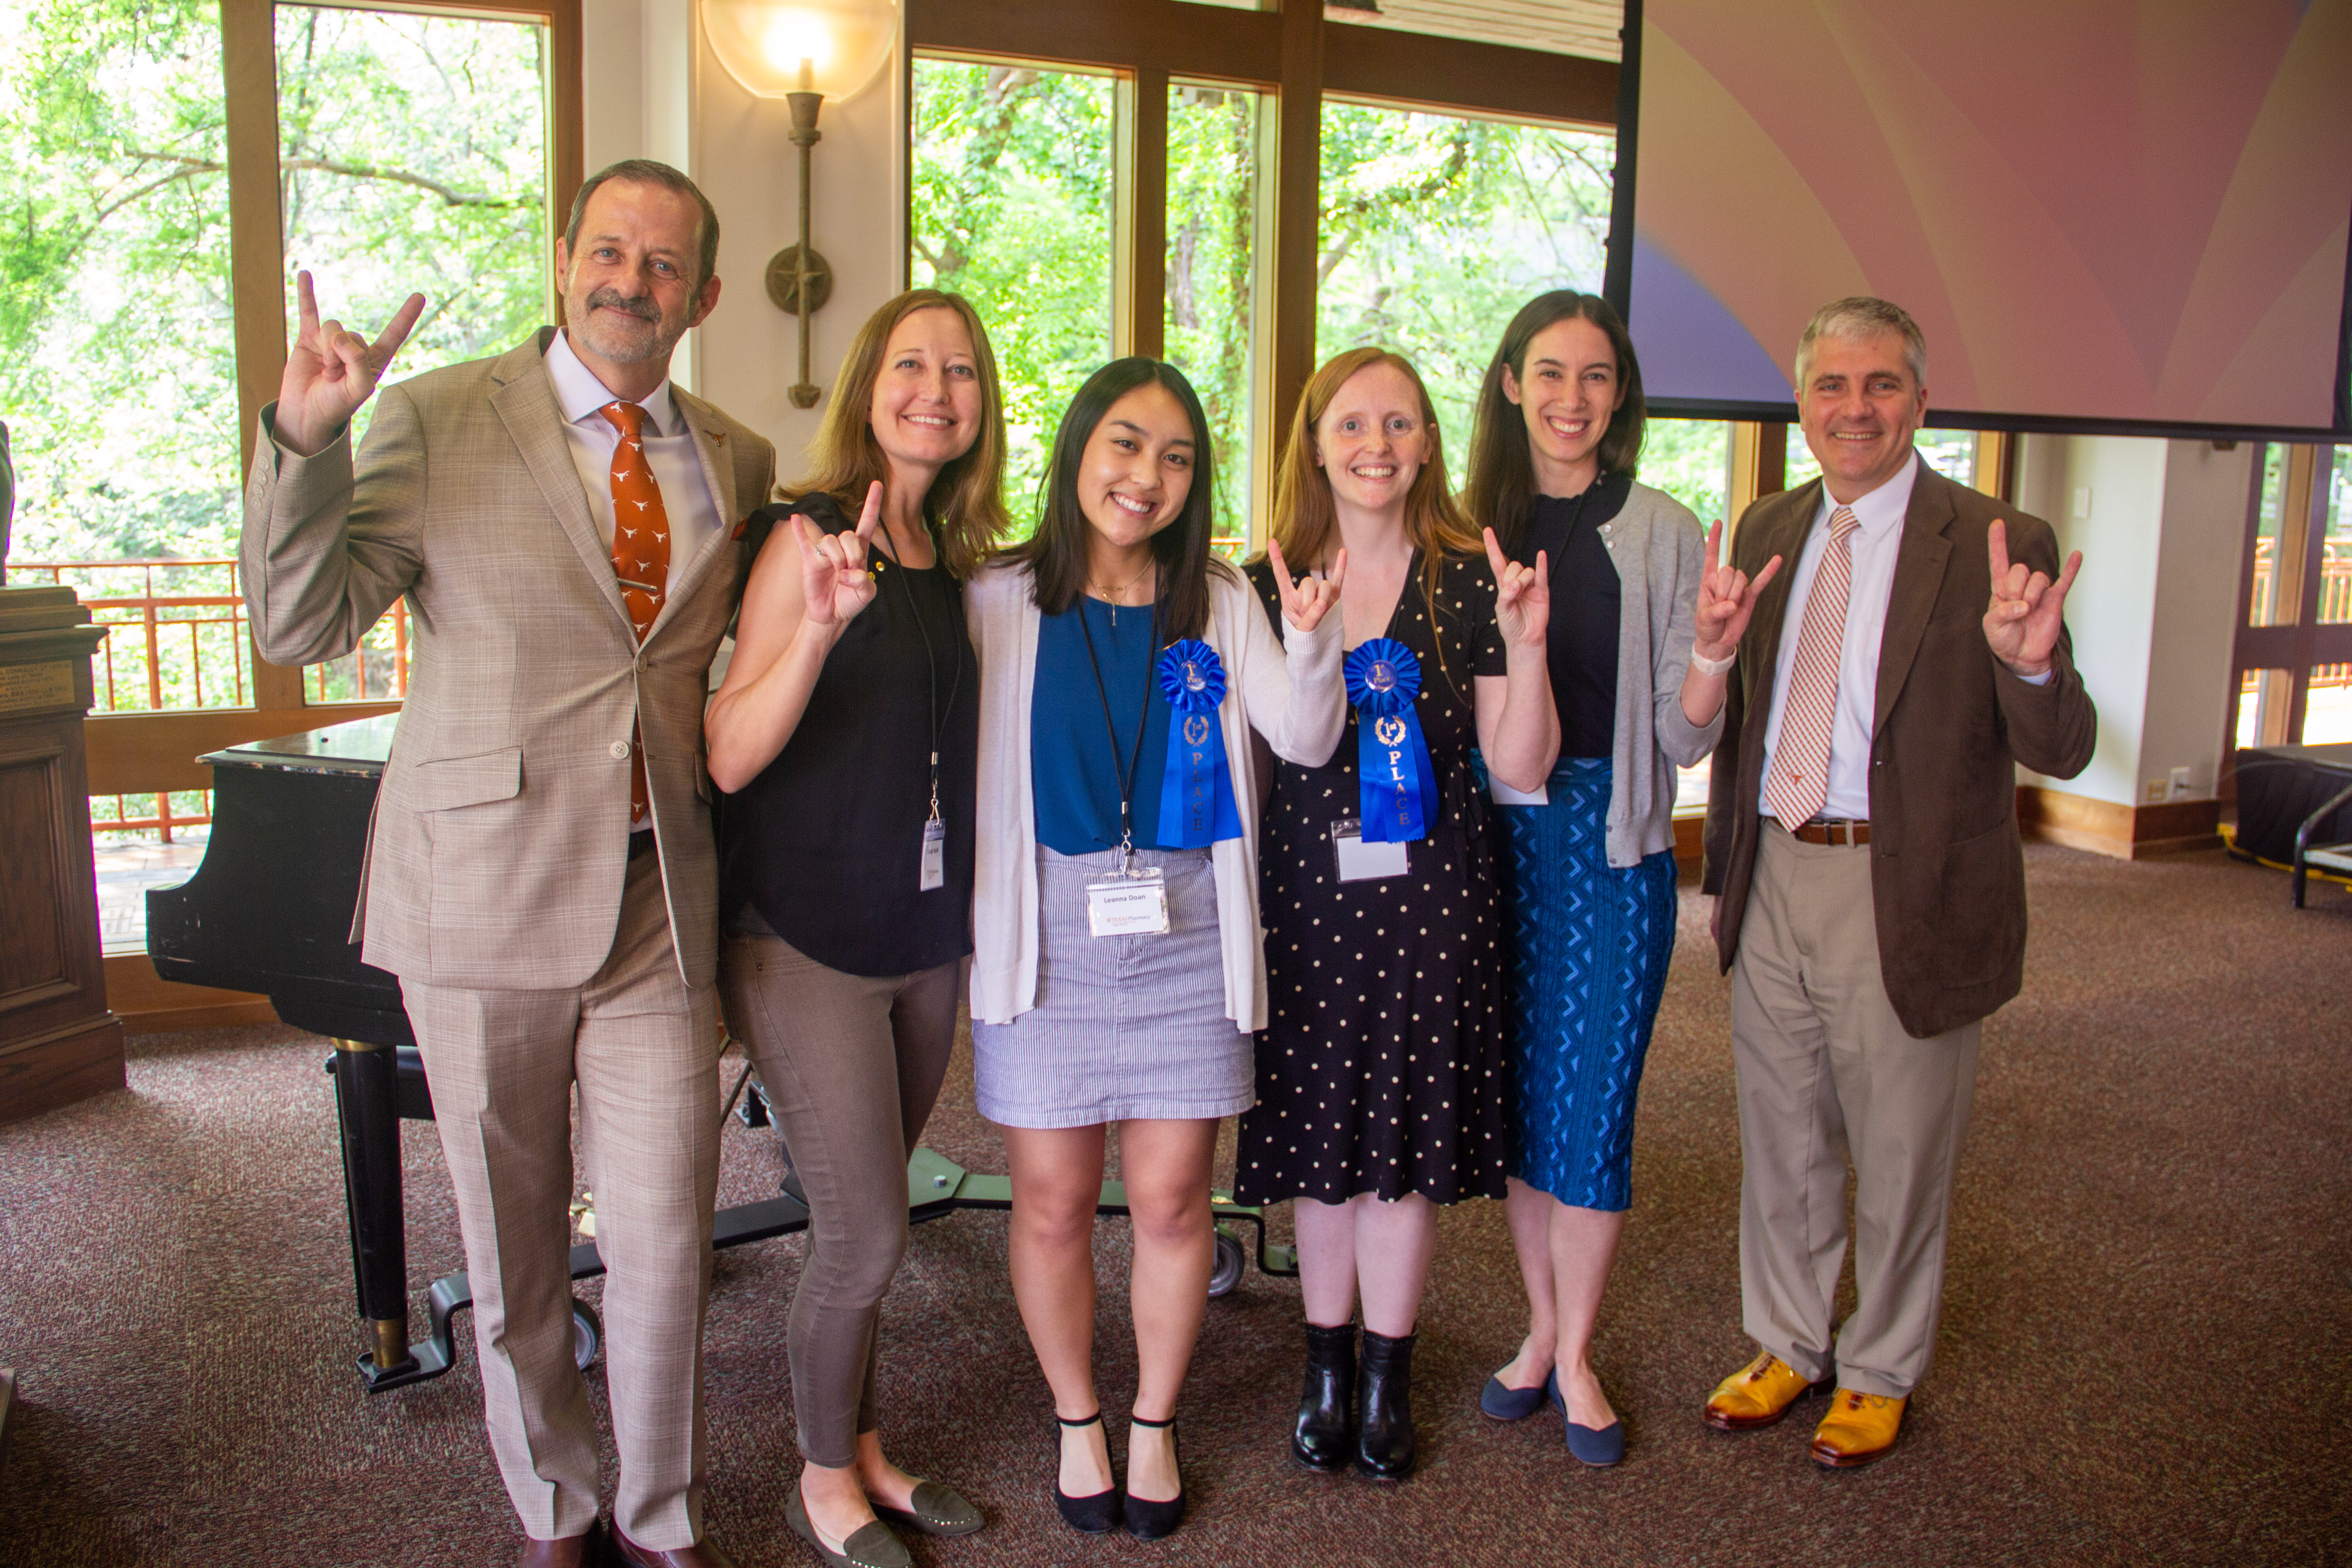 A group of people with blue ribbons giving the Hook 'em Horns hand gesture.